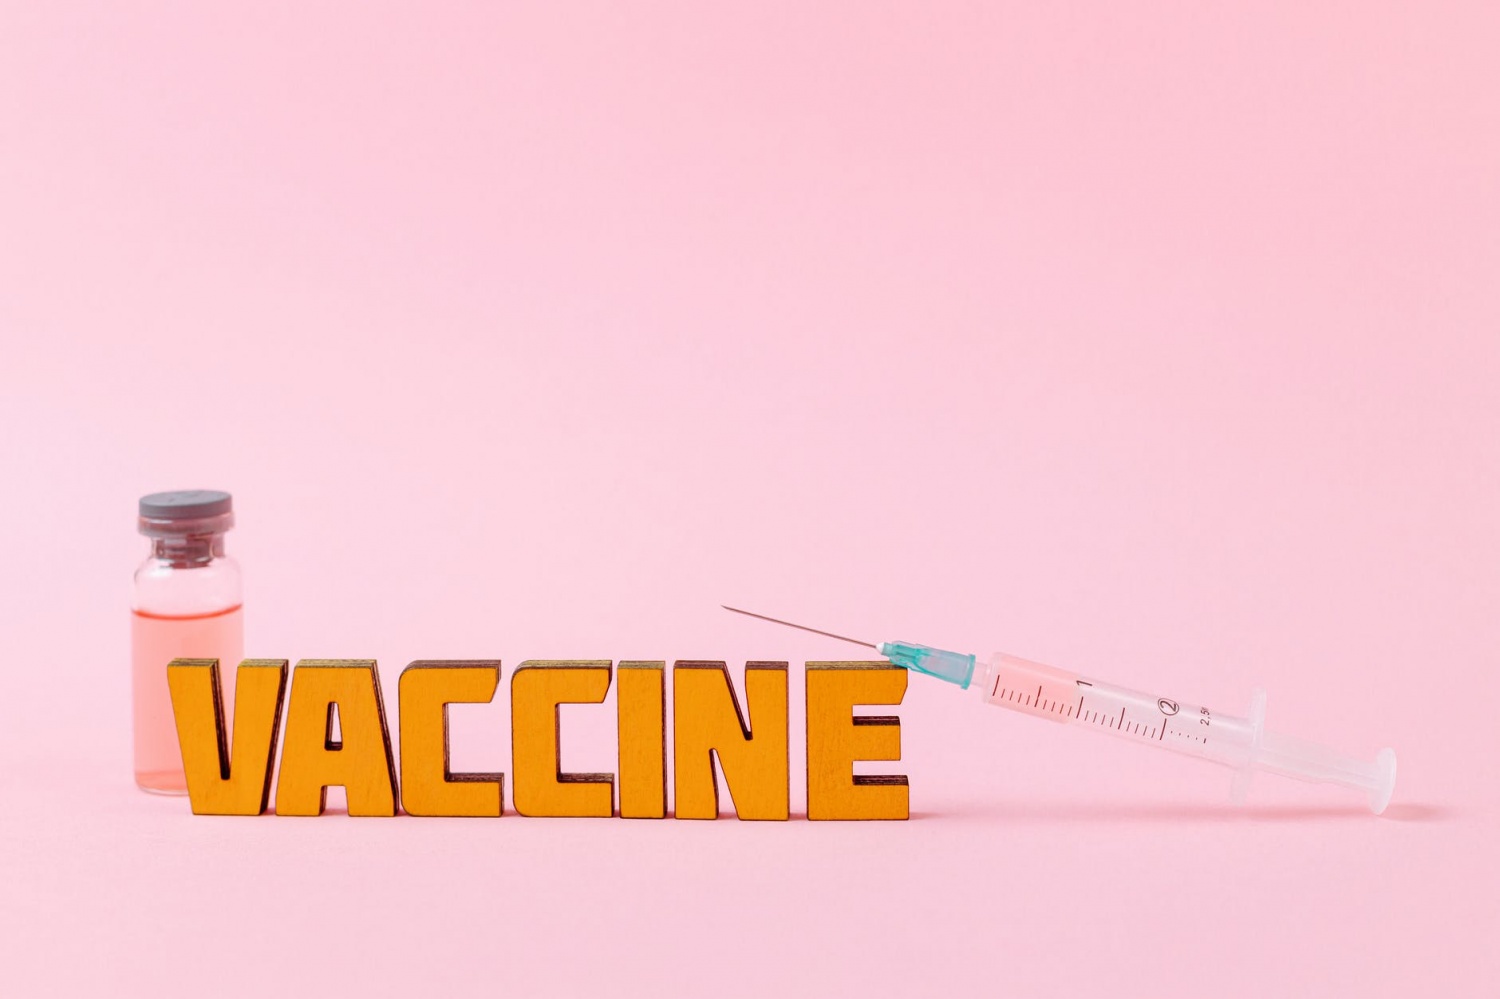 The booming black market in vaccine certificates amplifies the need for secured health passes 